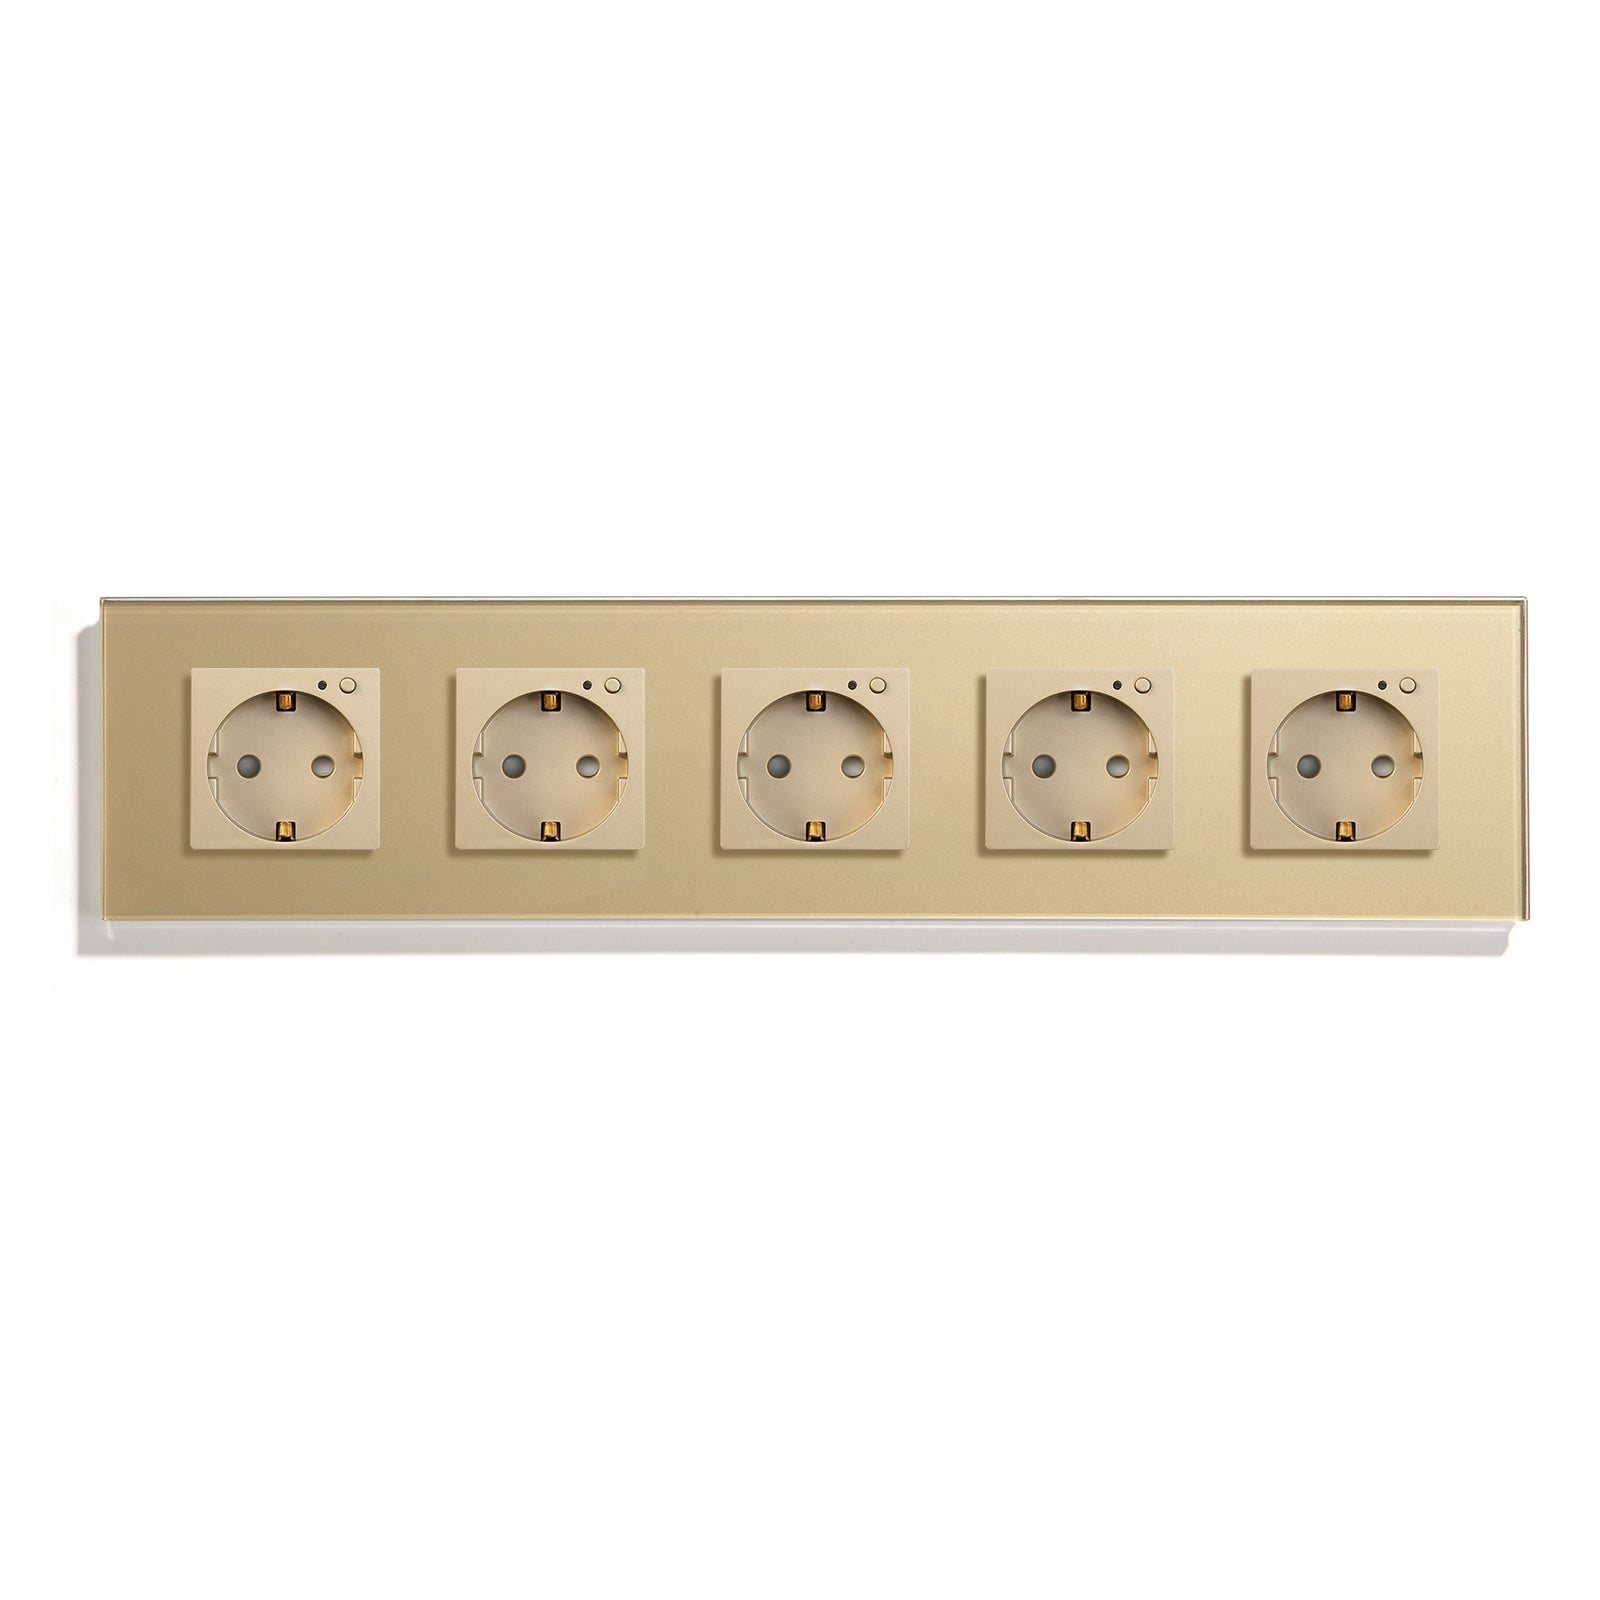 BSEED ZigBee EU Wall Sockets Power Outlets Kids Protection Wall Plates & Covers Bseedswitch golden Quintuple 